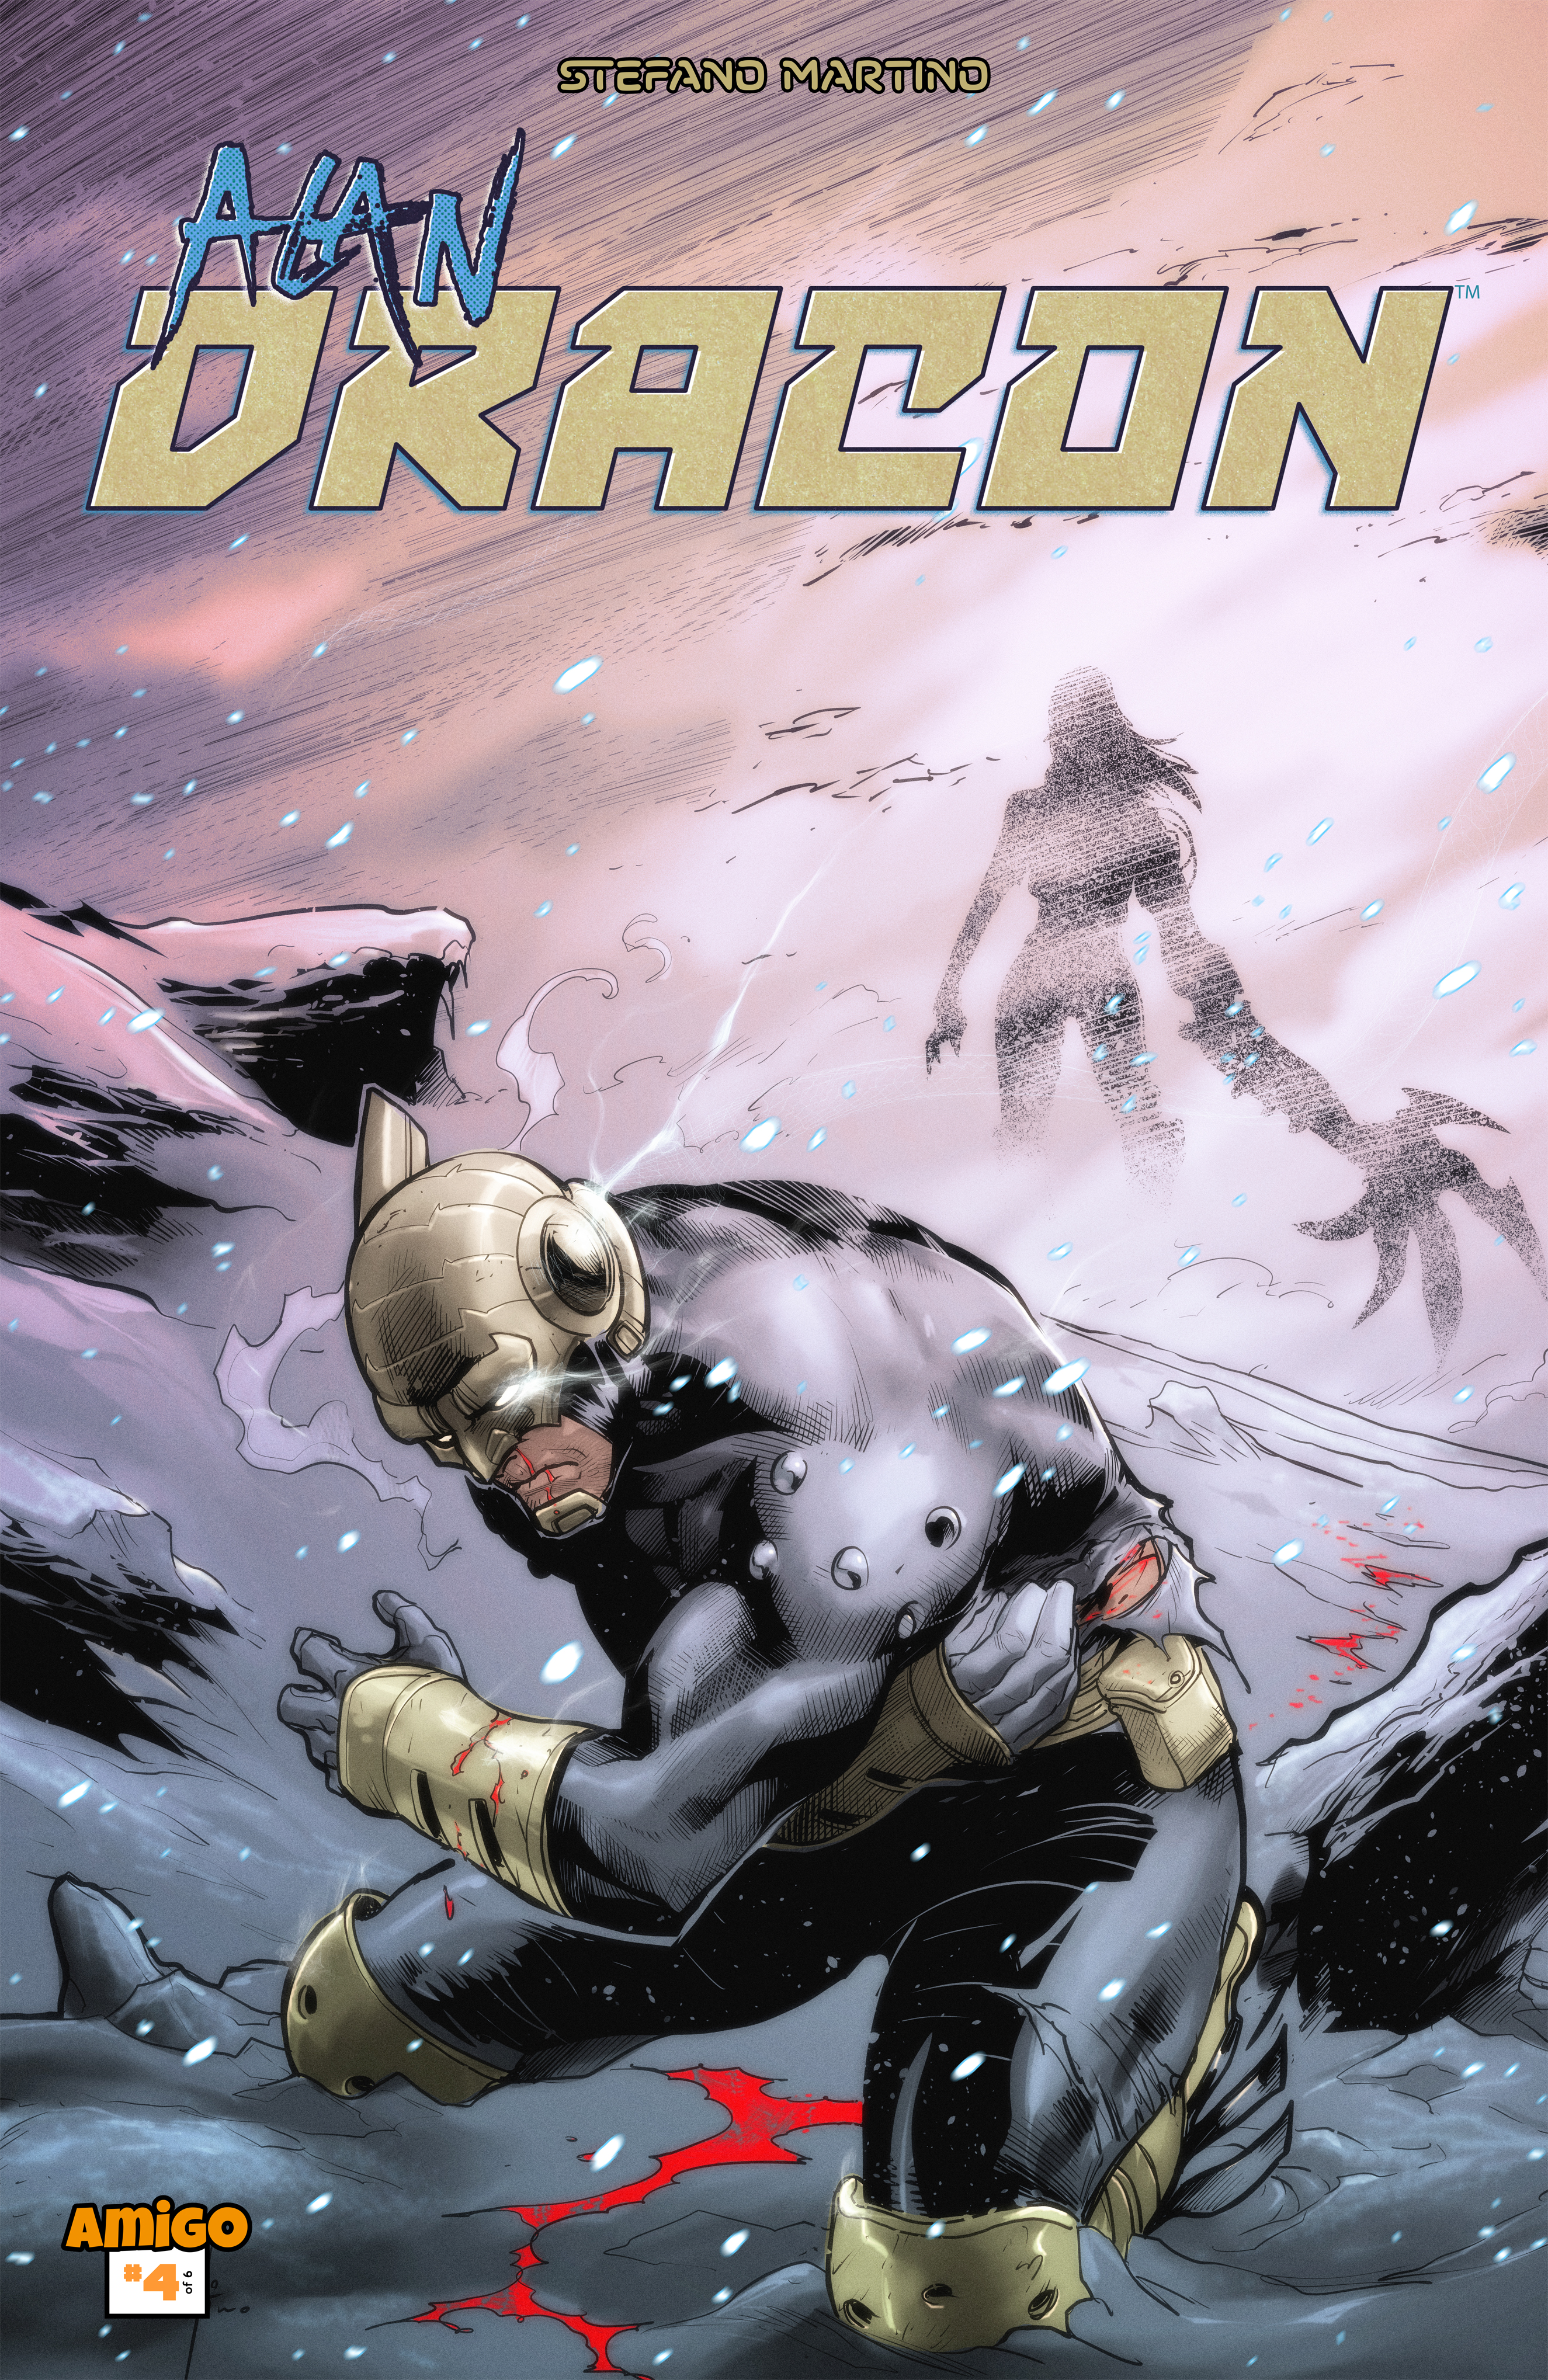 Read online Alan Dracon comic -  Issue #4 - 1